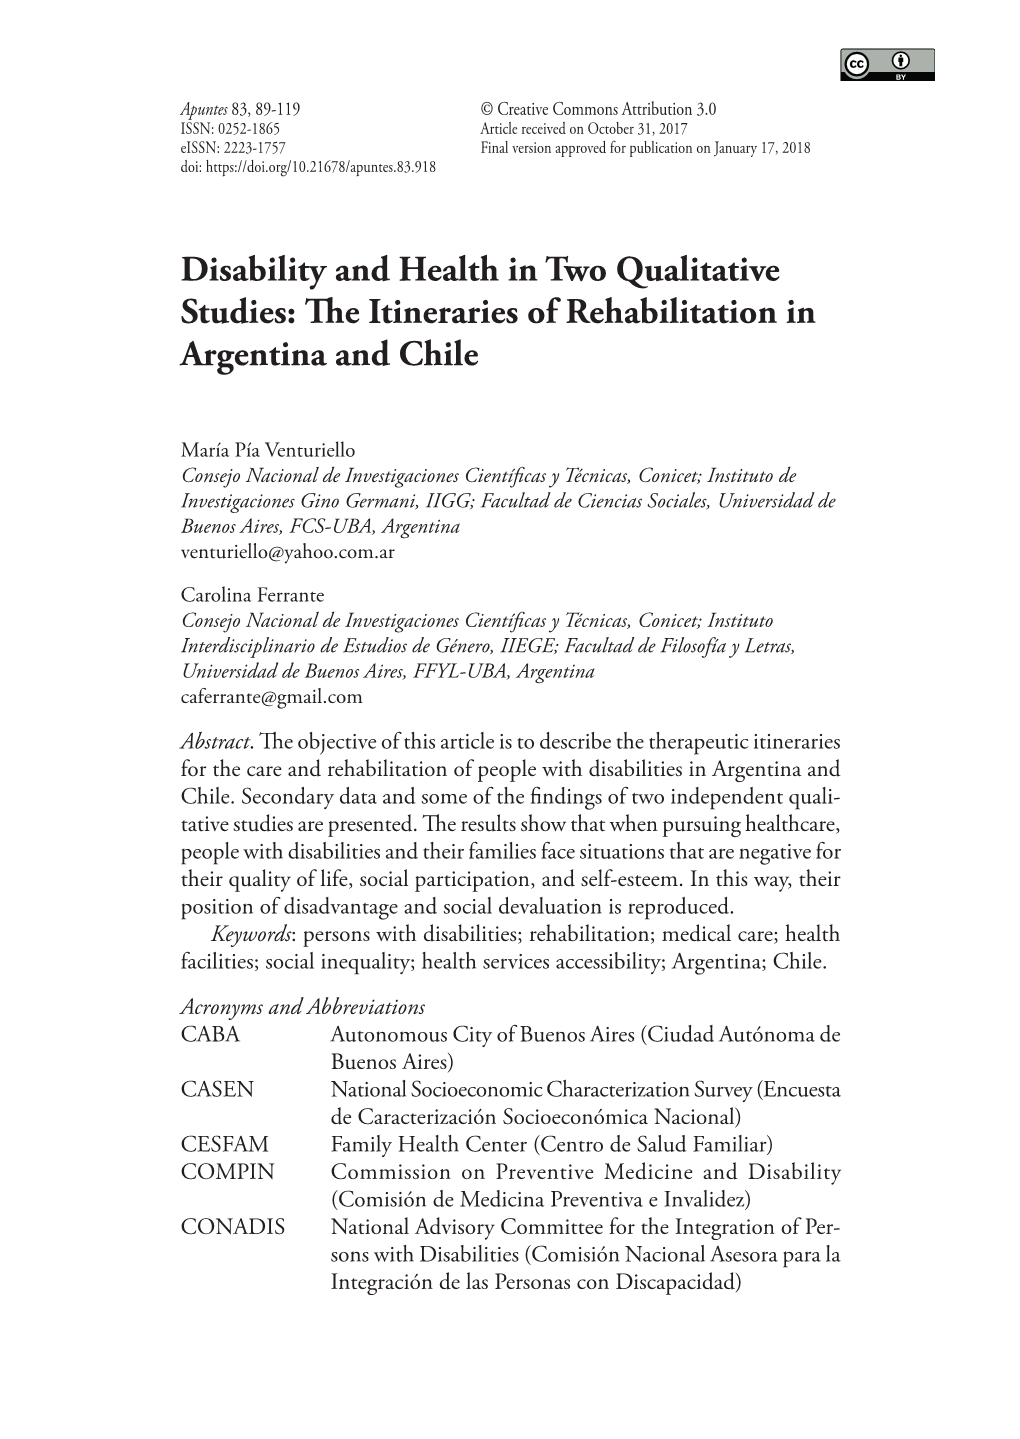 Disability and Health in Two Qualitative Studies: the Itineraries of Rehabilitation in Argentina and Chile